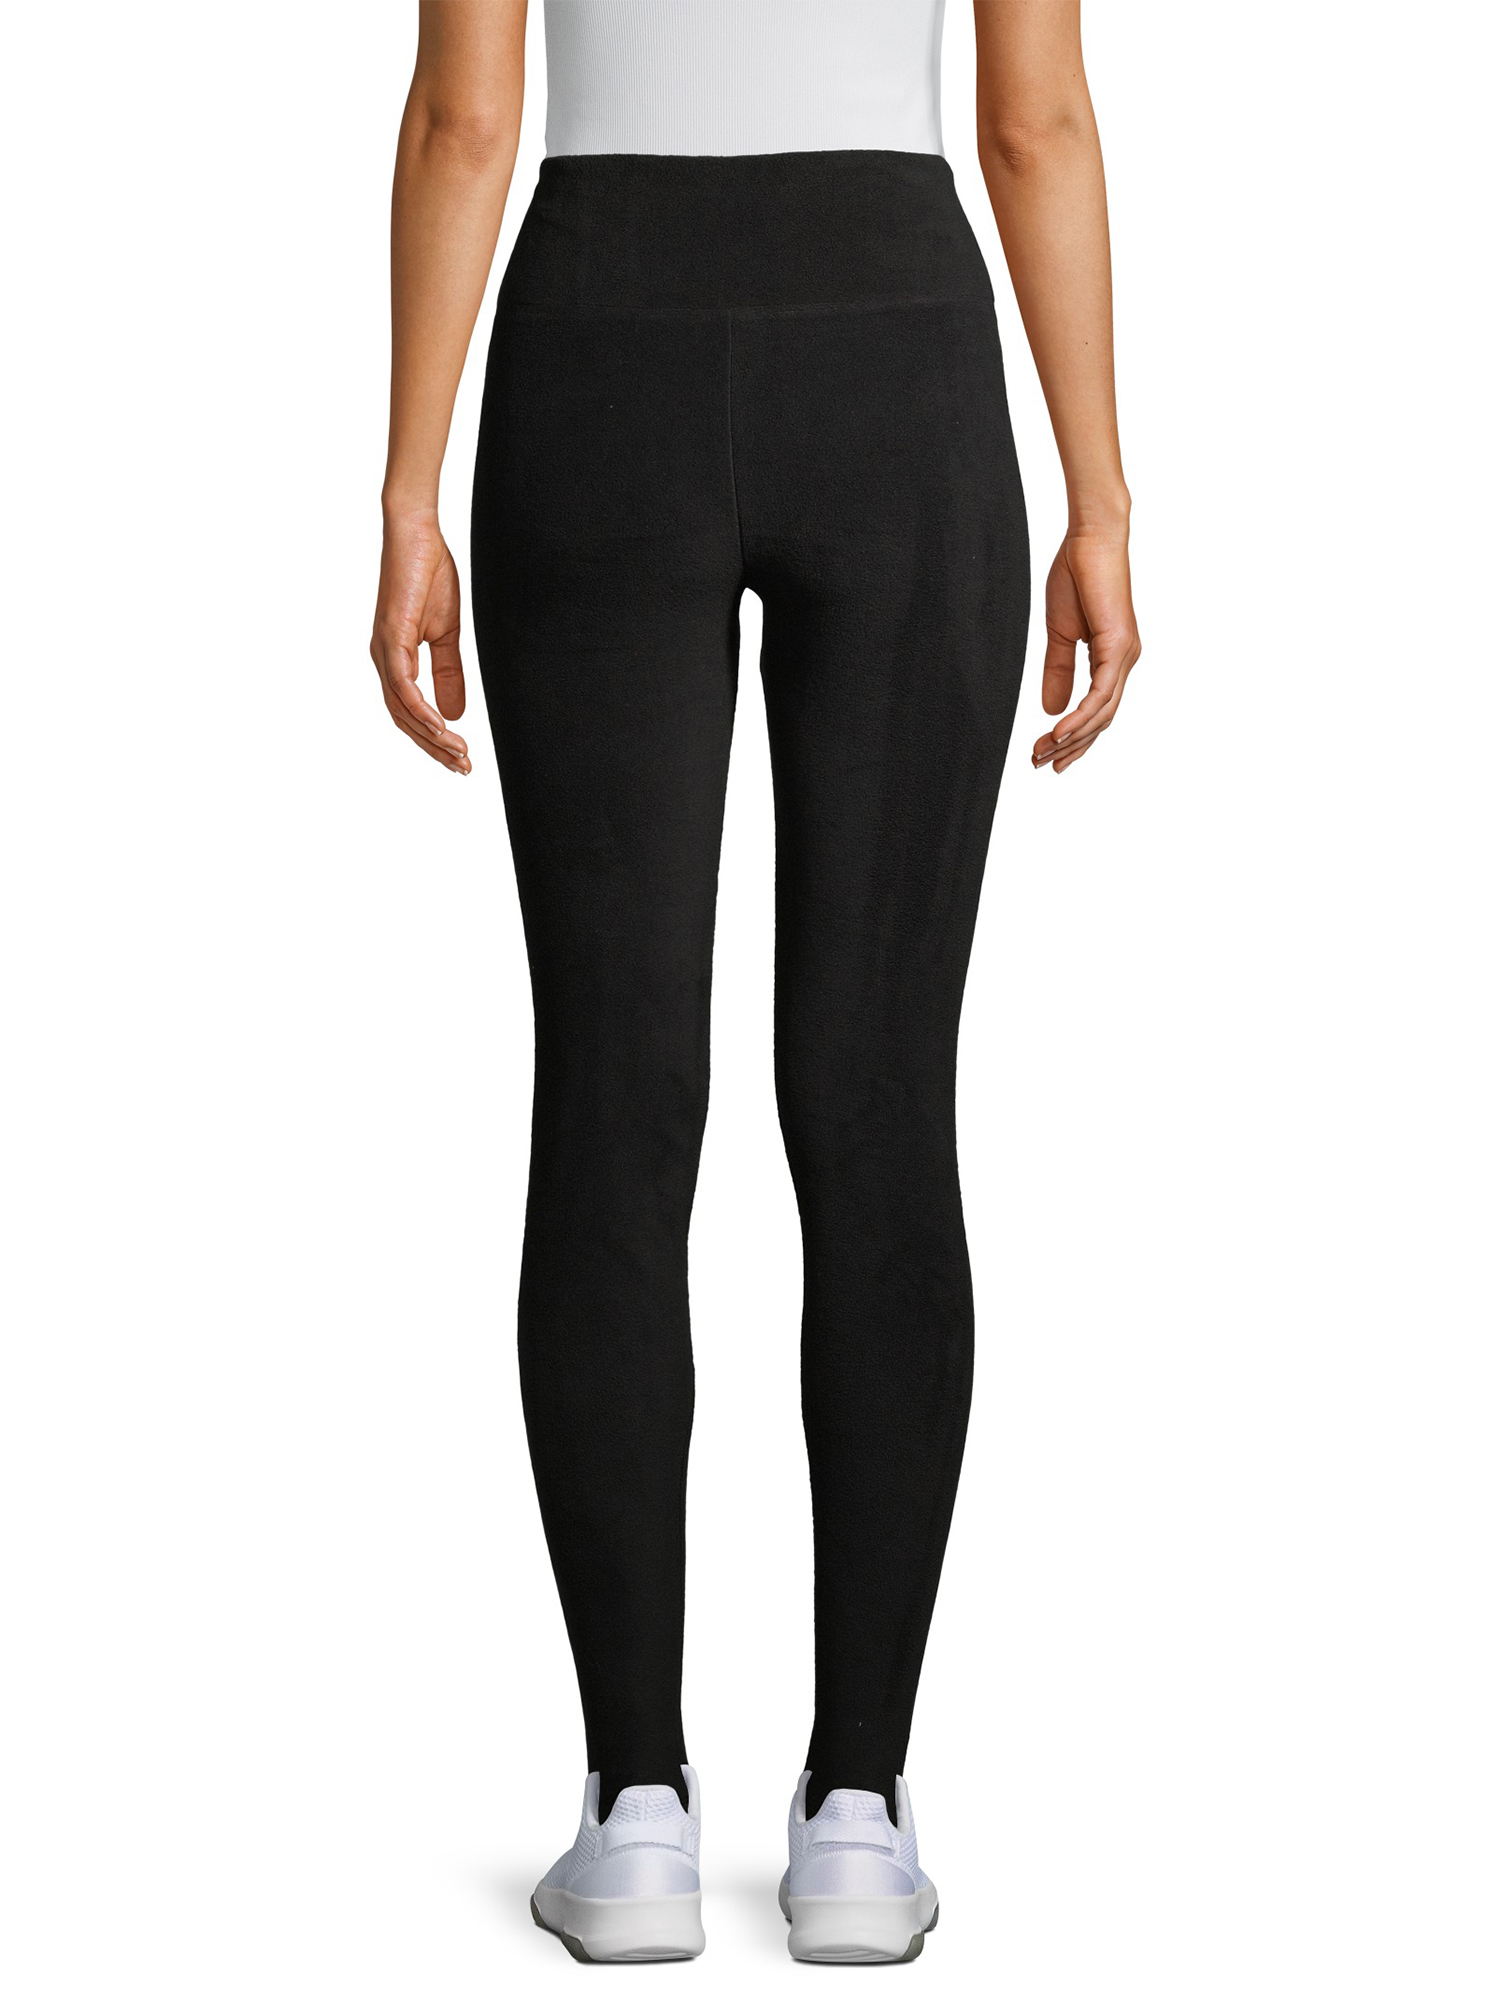 ClimateRight by Cuddl Duds Women's Stretch Fleece Base Layer High Waisted Thermal Leggings - image 5 of 6